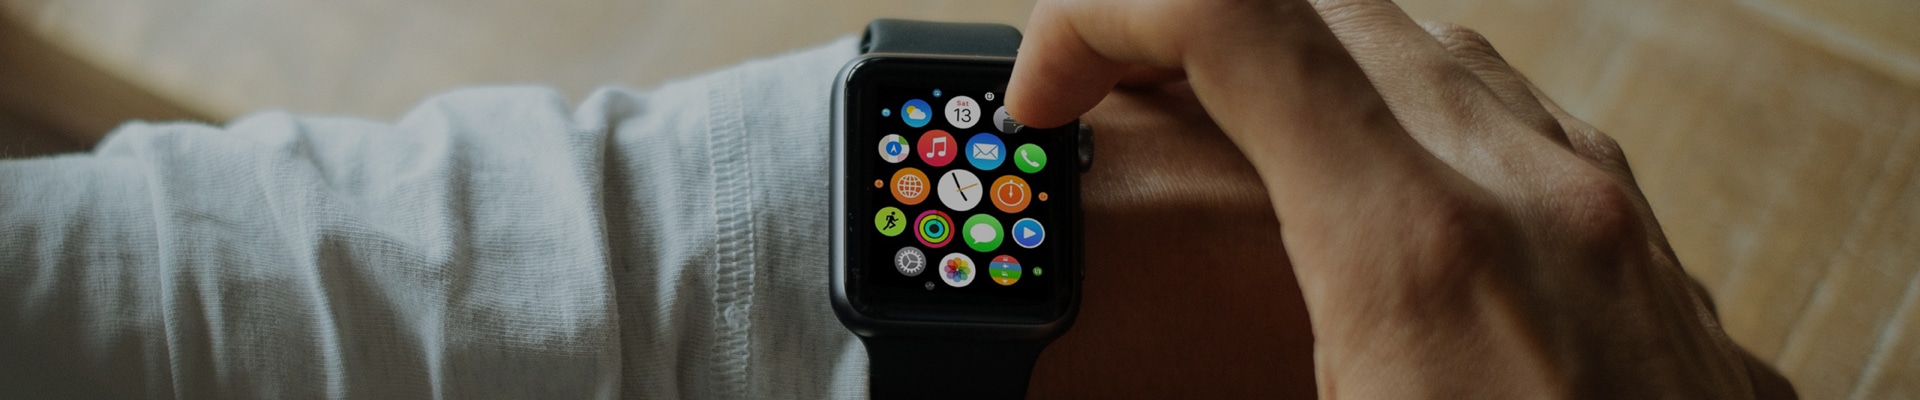 6 Predictions on How the Apple Watch Will Impact Email Marketers—What We Got Right (and Wrong)